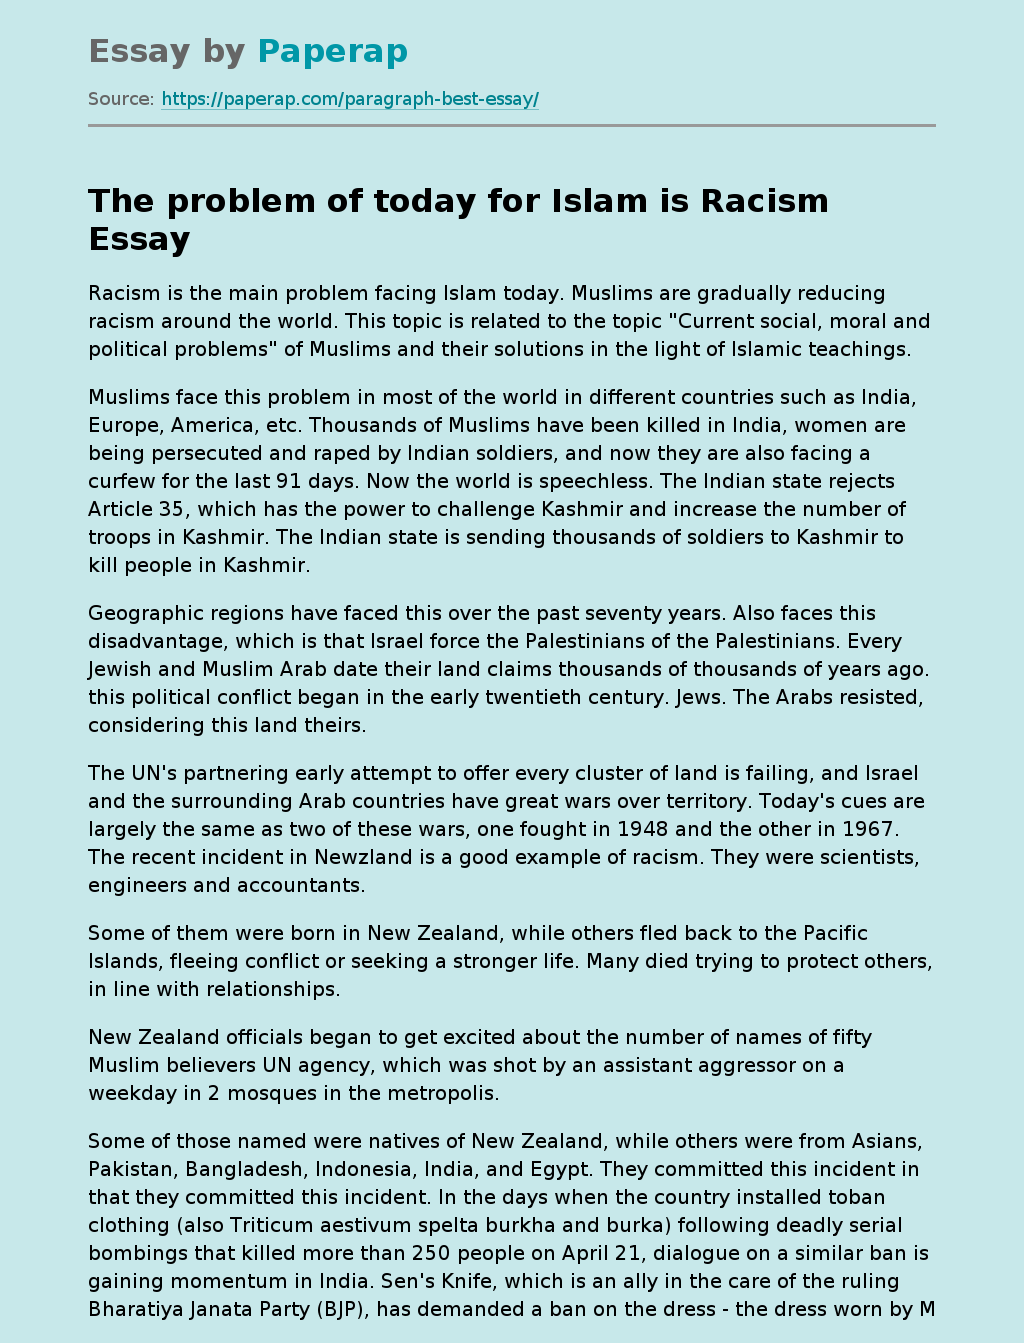 The problem of today for Islam is Racism